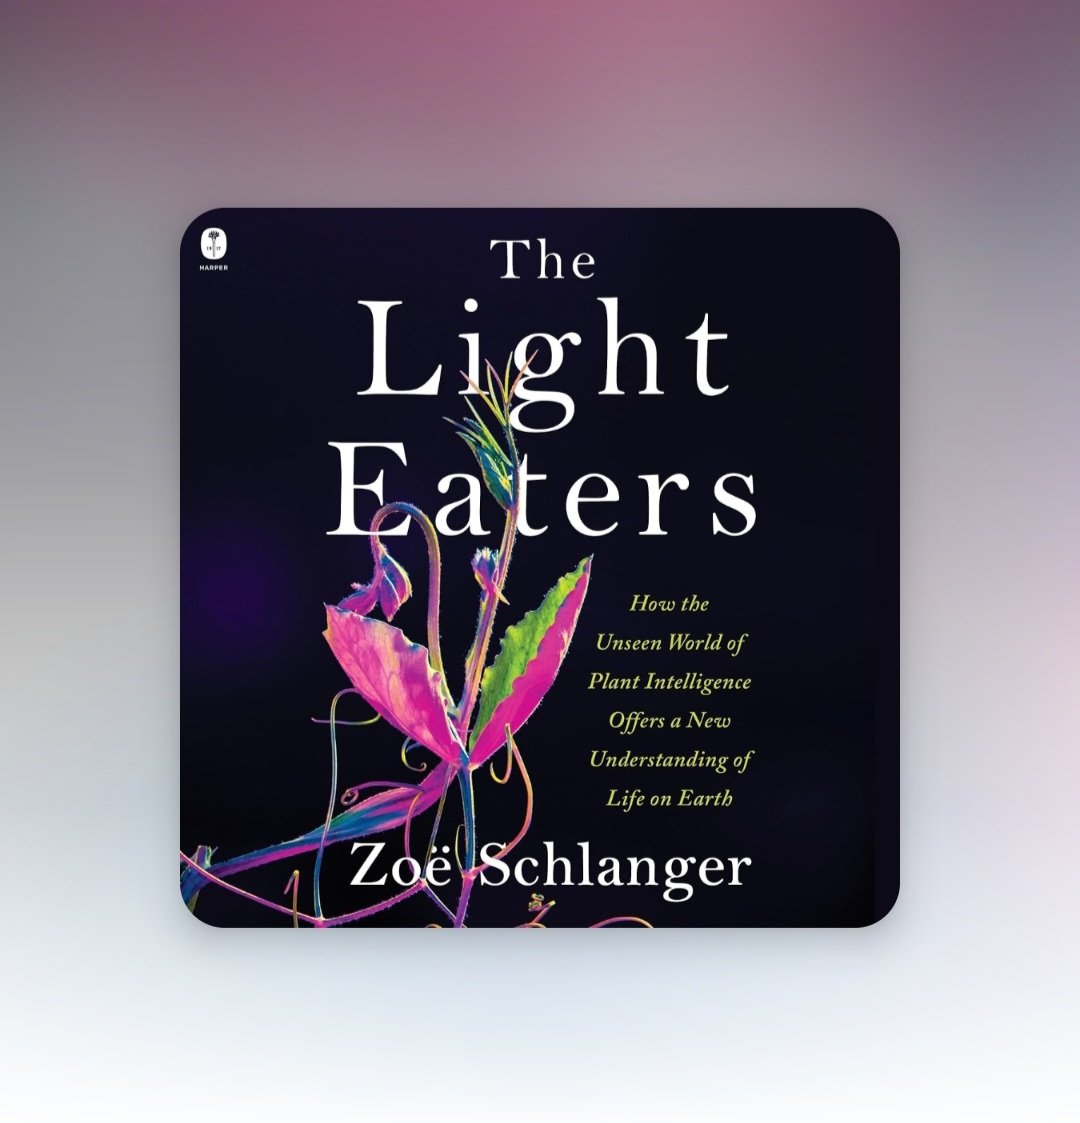 For my book #24 of #52books2024, I have selected '#TheLightEaters: How the Unseen World of Plant Intelligence Offers a New Understanding of Life on Earth' by @zoeschlanger. @TheAtlantic @harperbooks @HarperAudio @audible_com #ReadByTheAuthor